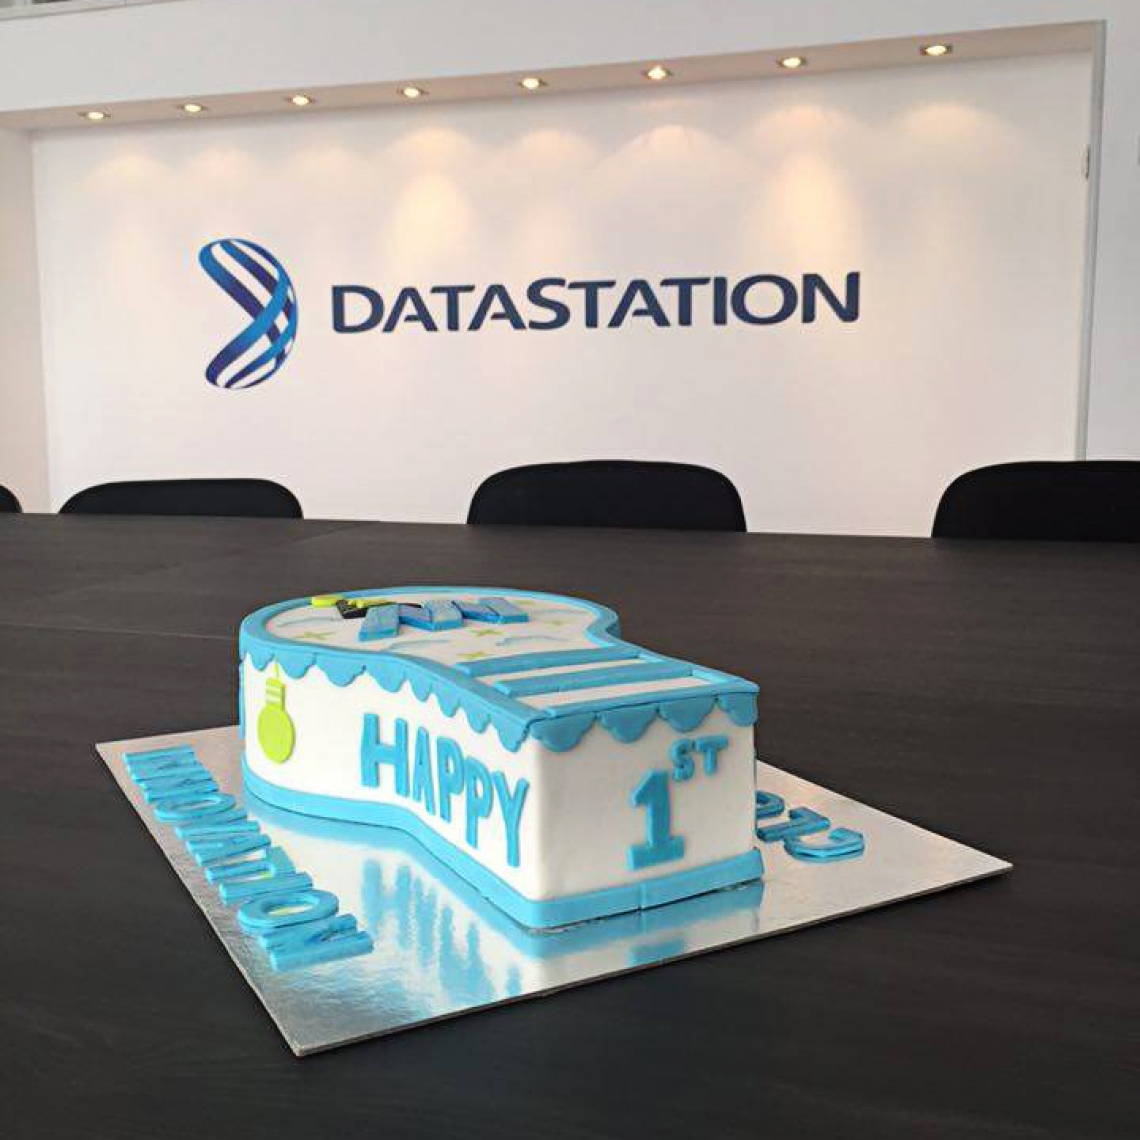 Thanks to you our Innovation Cloud celebrates its first birthday